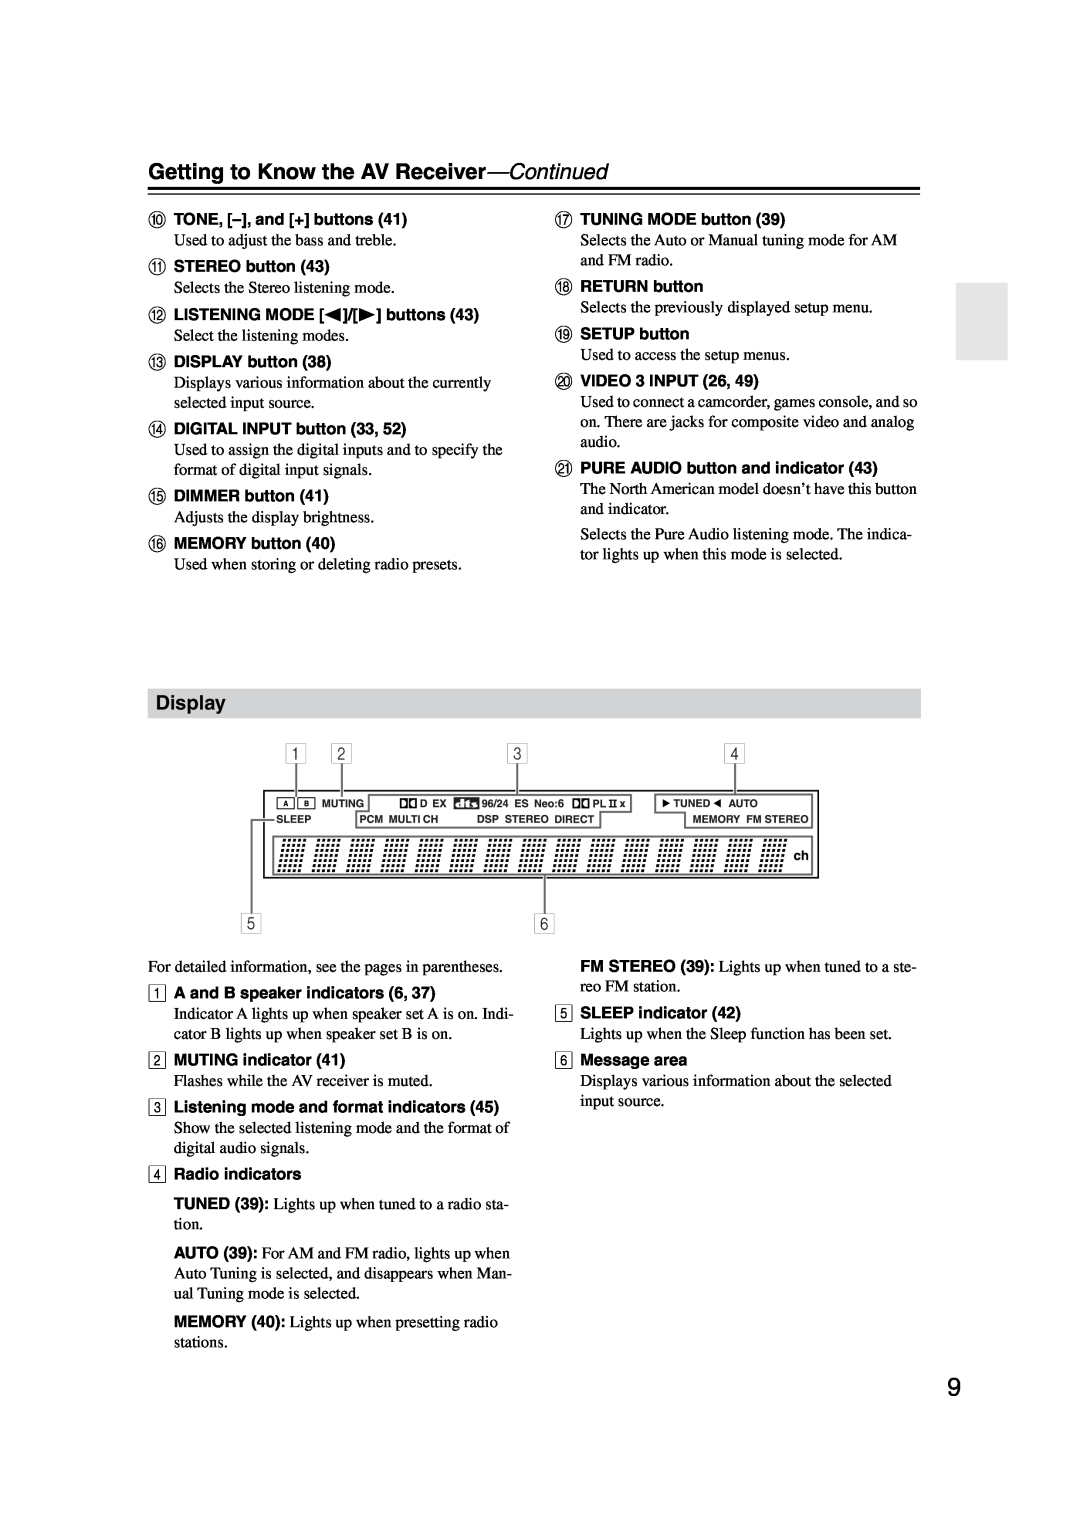 Onkyo TX-SR574 instruction manual Getting to Know the AV Receiver-Continued, Display 